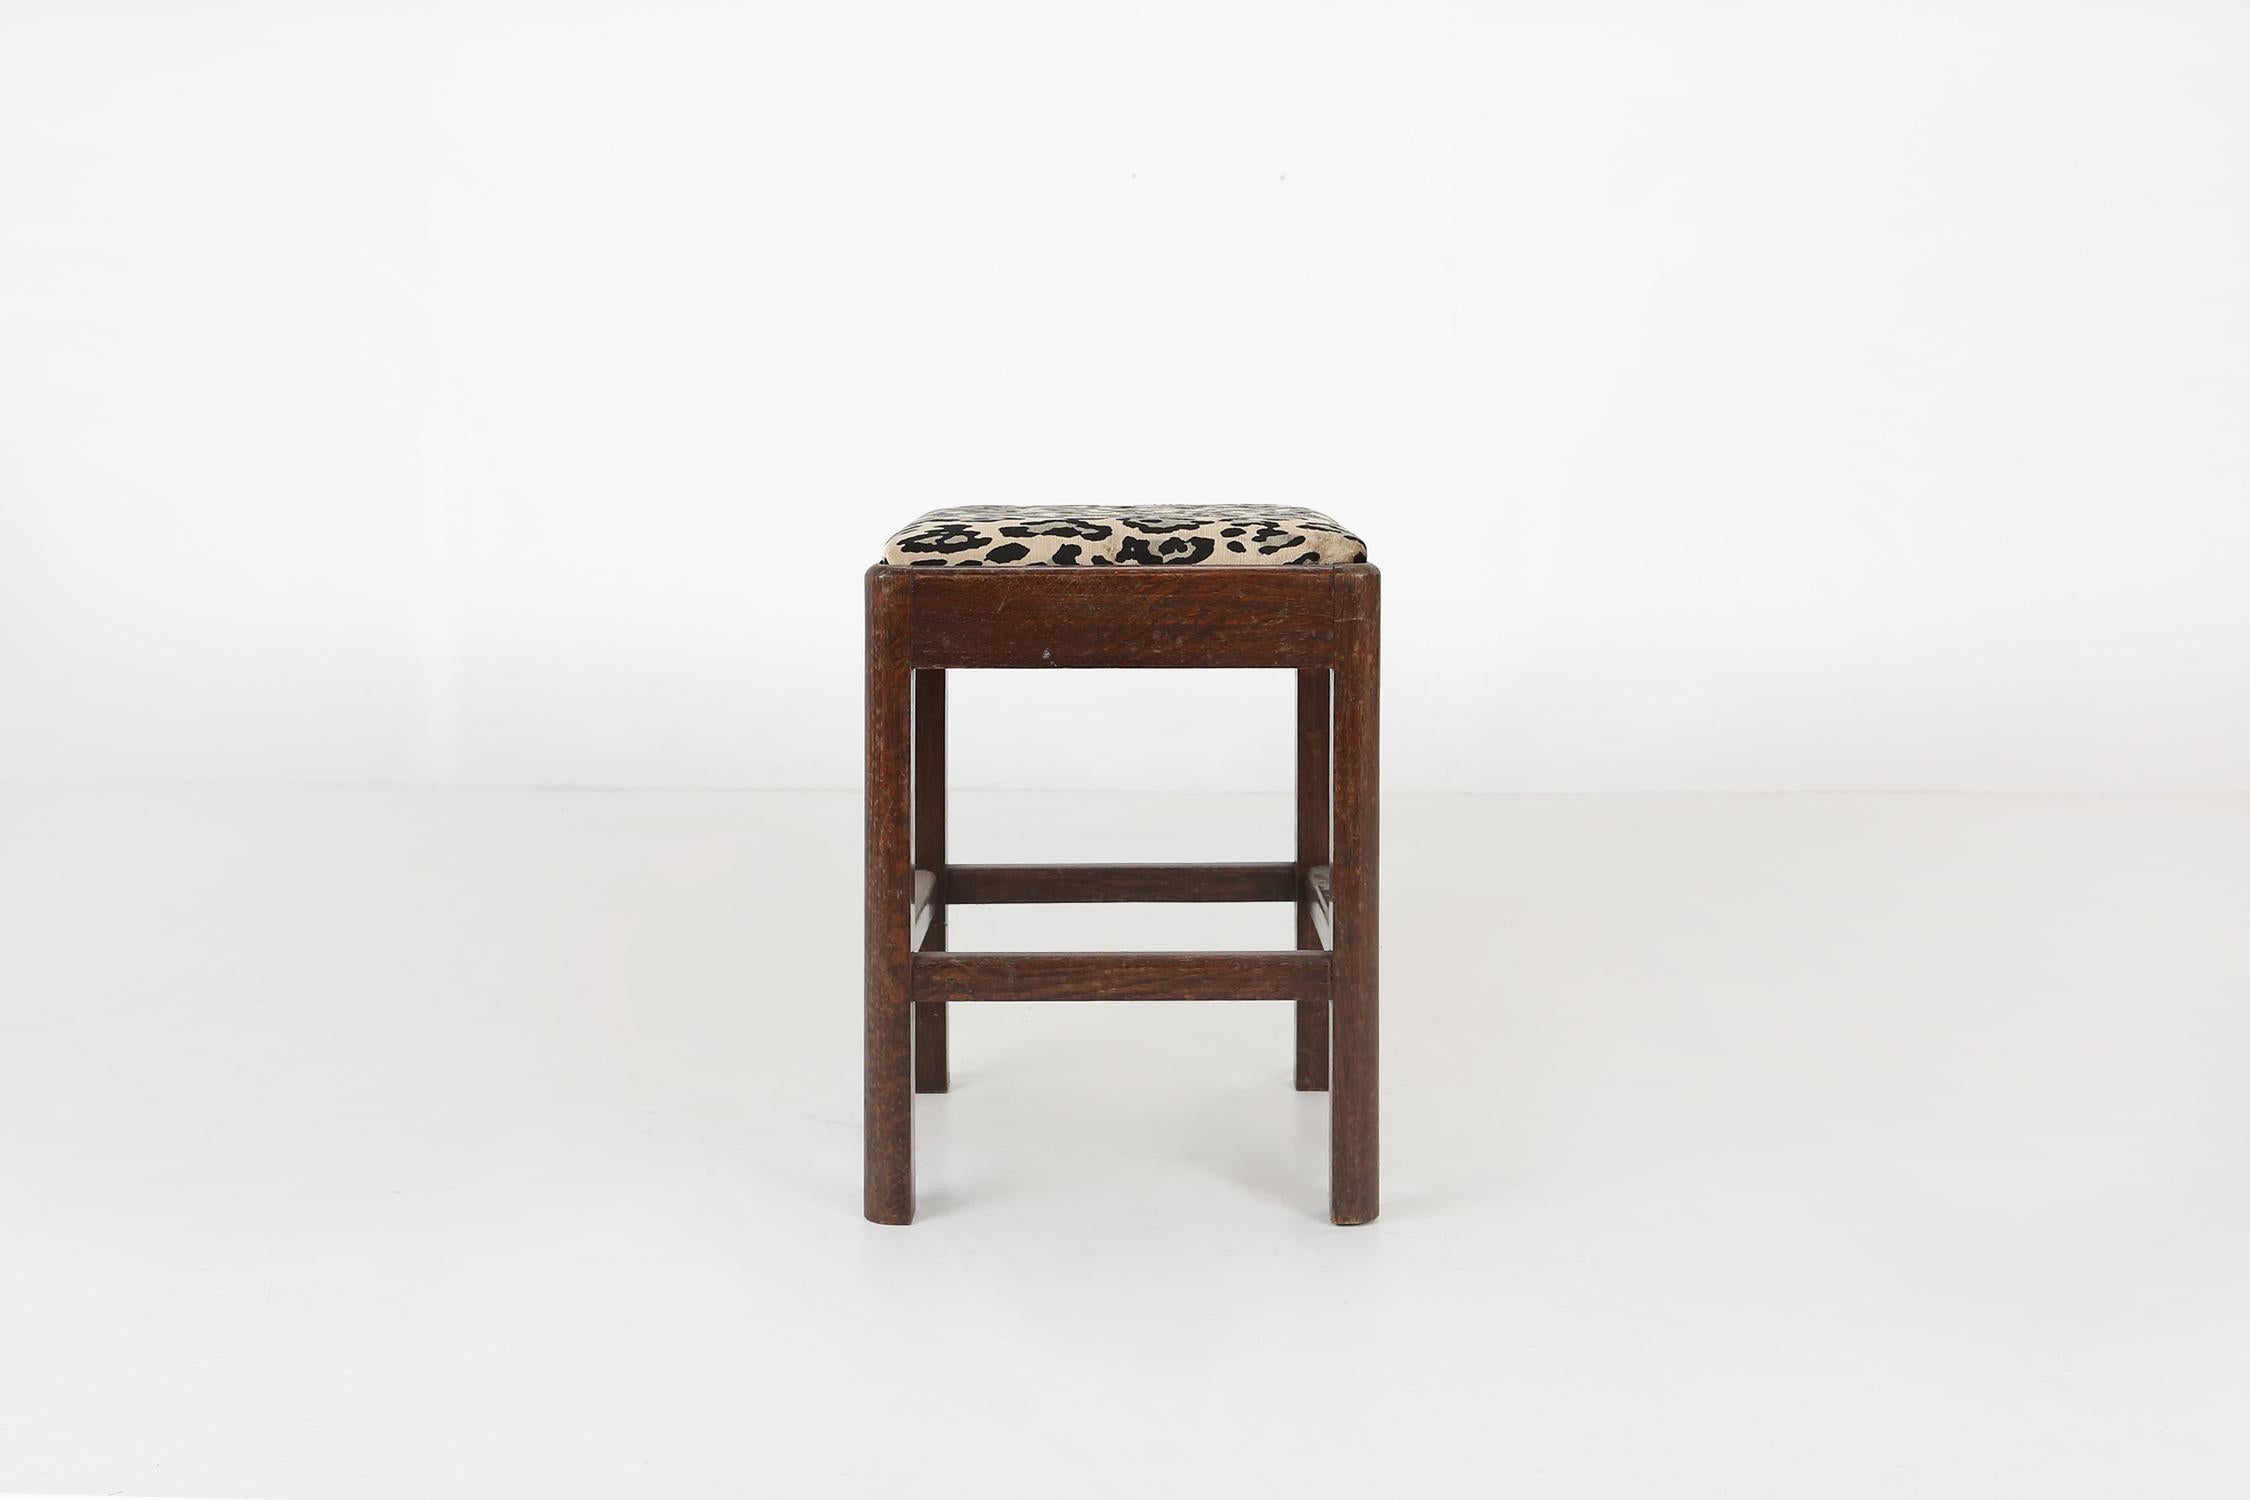 Art Deco stool made around 1930 with a new upholstered fabric in leopard print.